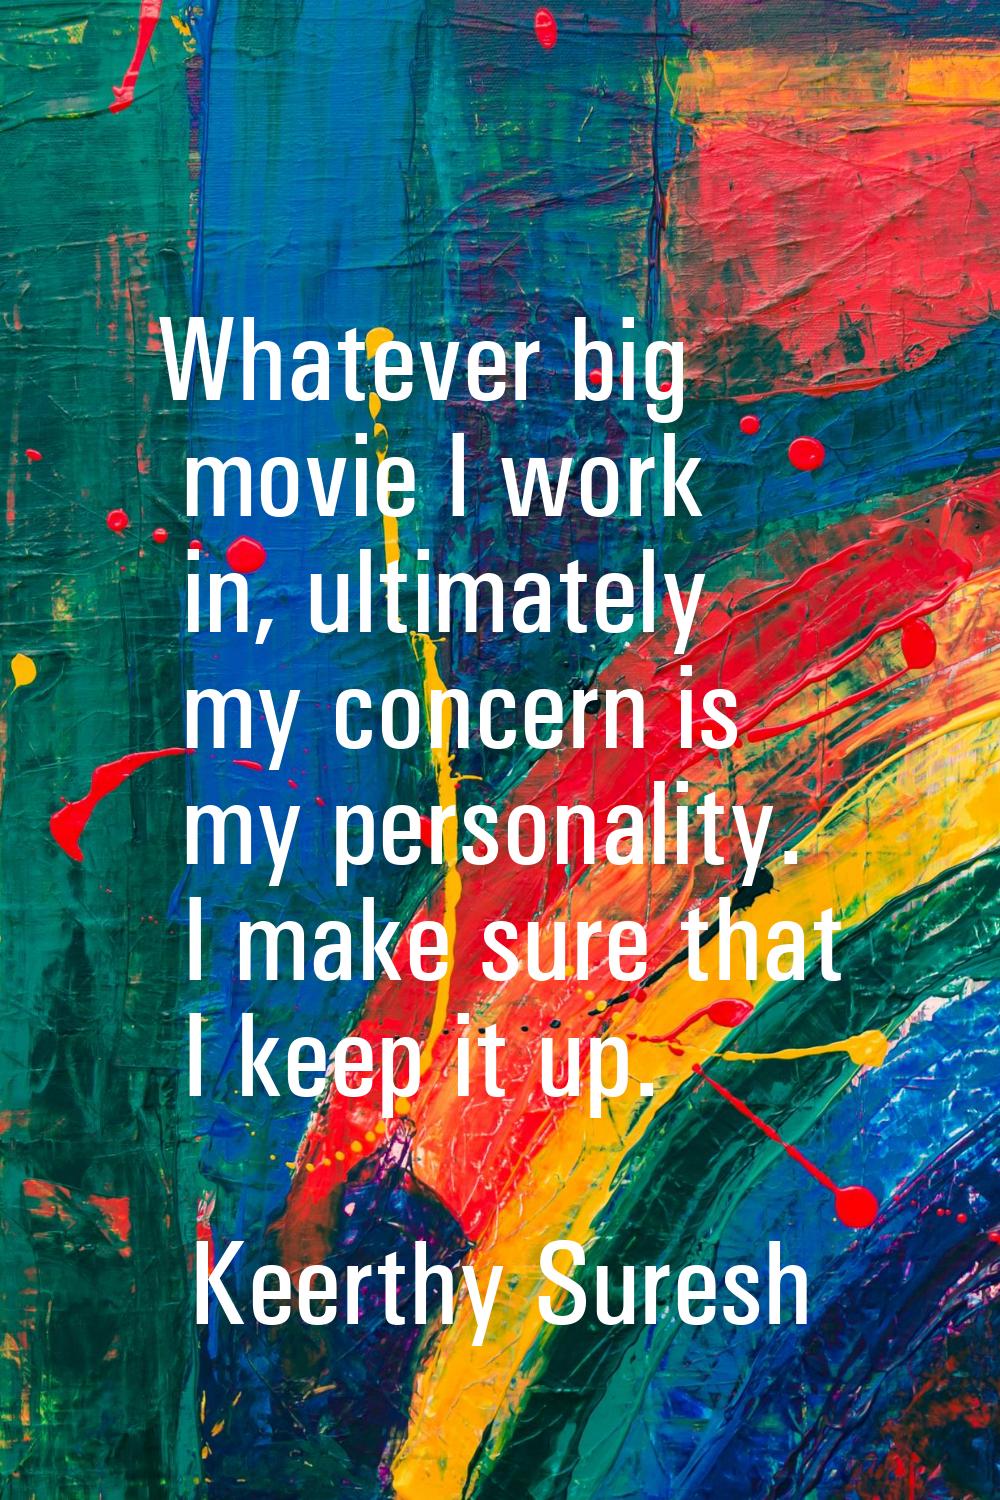 Whatever big movie I work in, ultimately my concern is my personality. I make sure that I keep it u